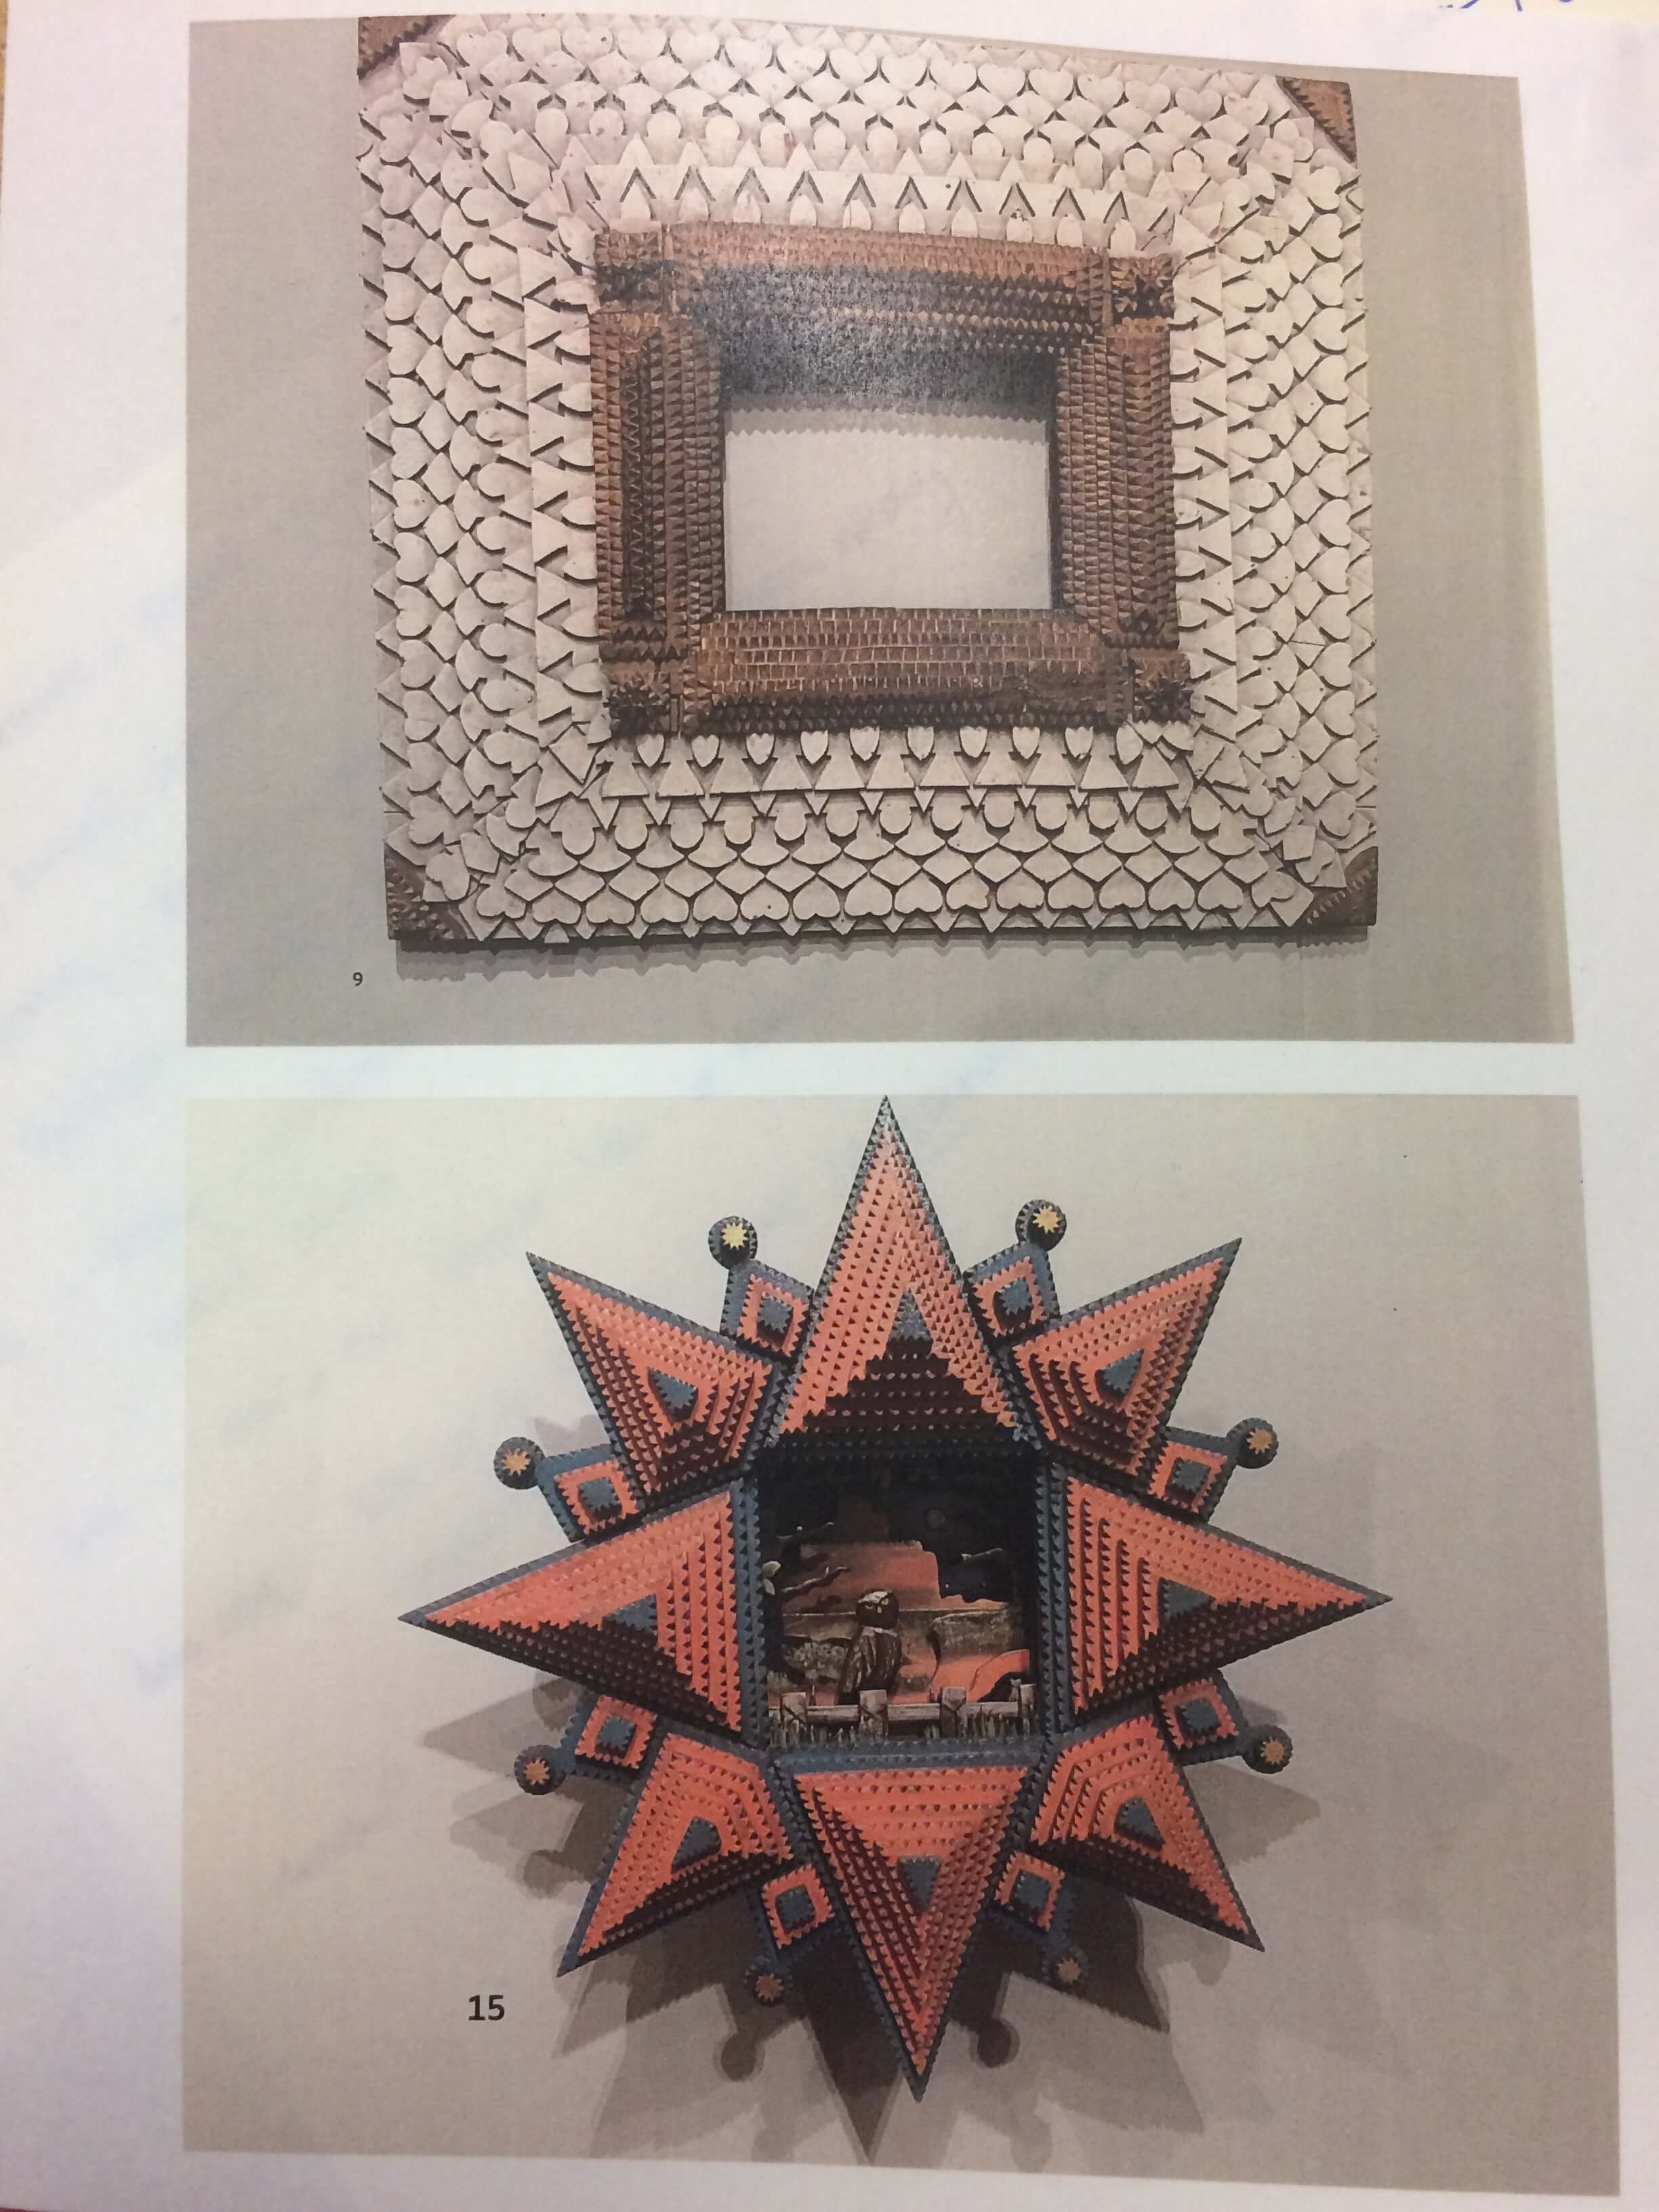 Some of the research into tramp art which became a guiding aesthetic for the fireplace.